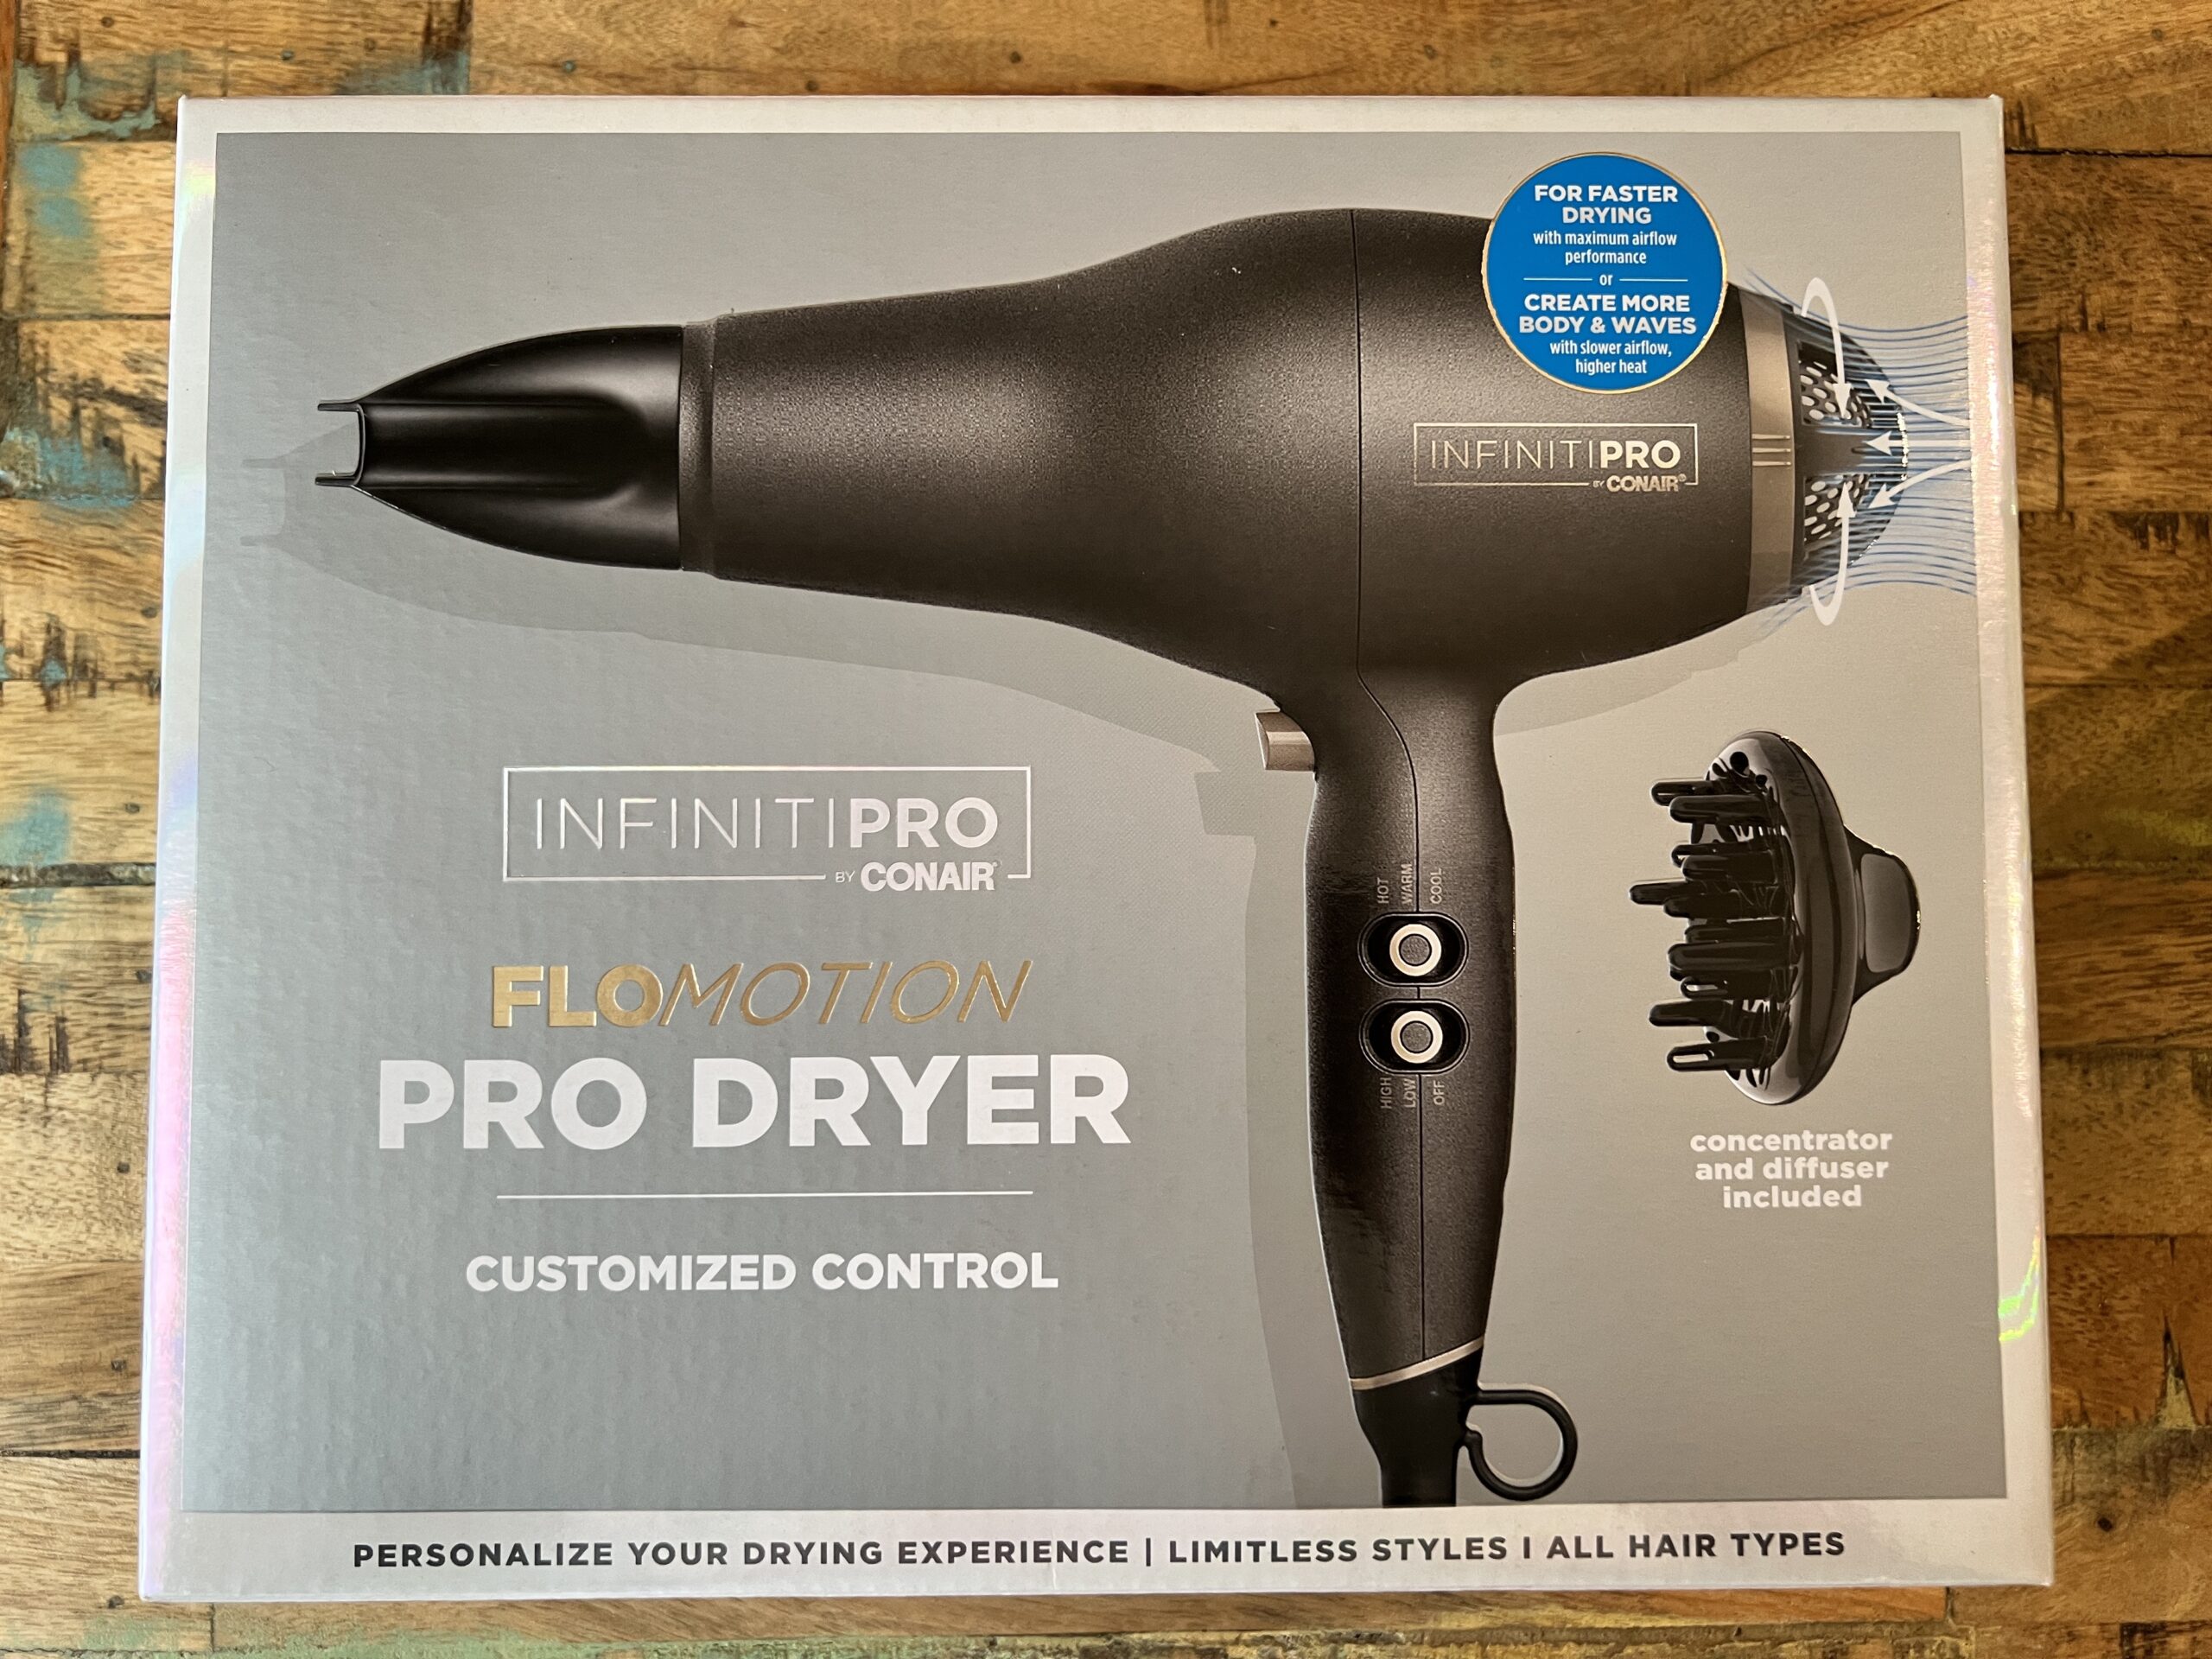 InfinitiPro Flomotion Pro Dryer is great for faster drying with maximum airflow performance. The dryer works on all hair types and includes a concentrator and diffuser.